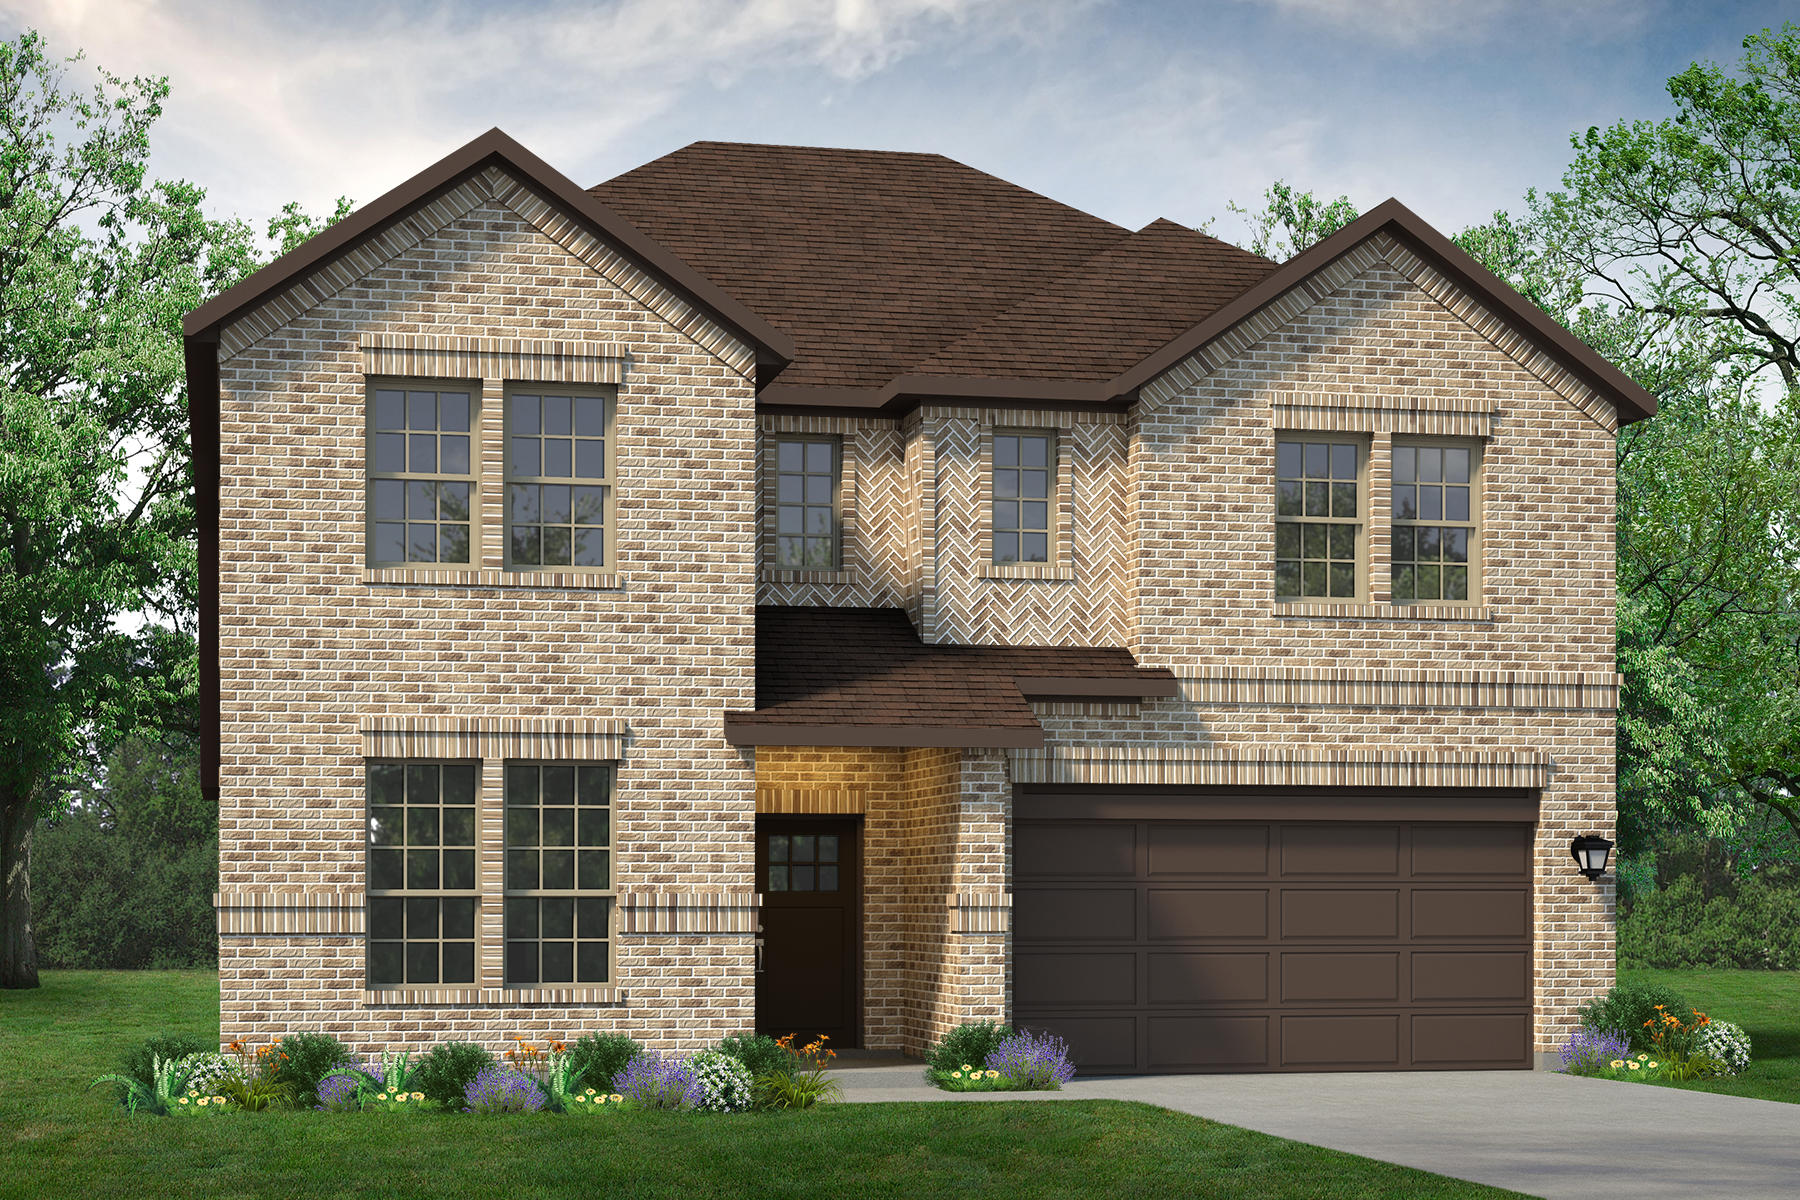 A rendering of a two-story Trinity Floor Plan home with a garage.